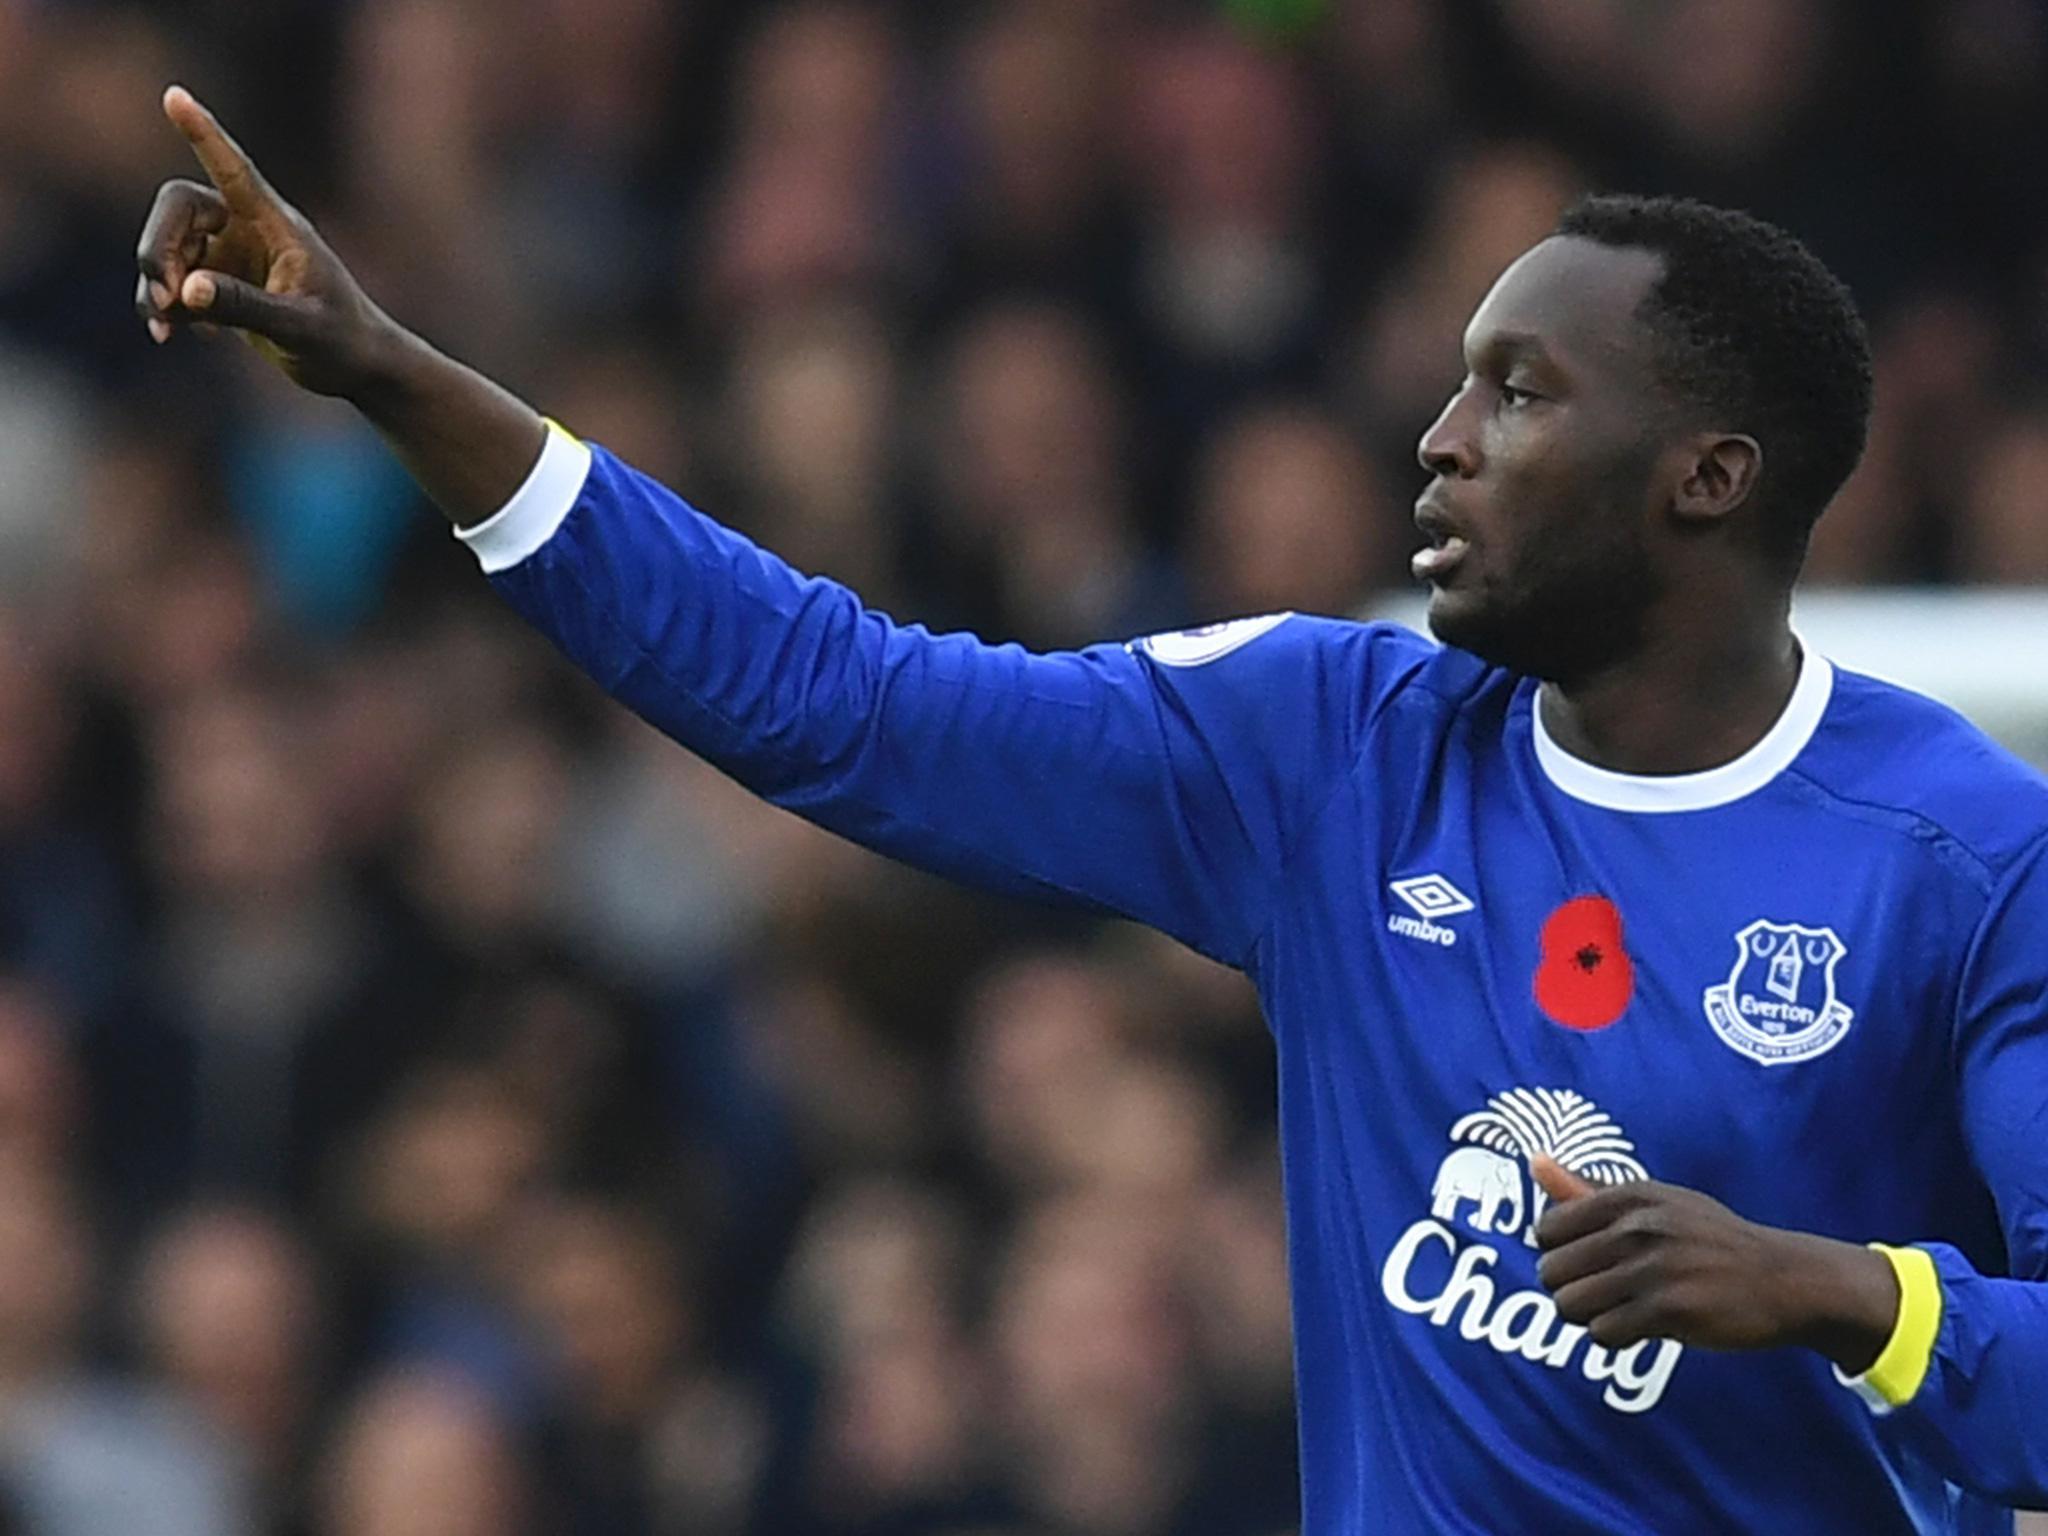 Lukaku is fast becoming one of the most wanted young forwards in European football